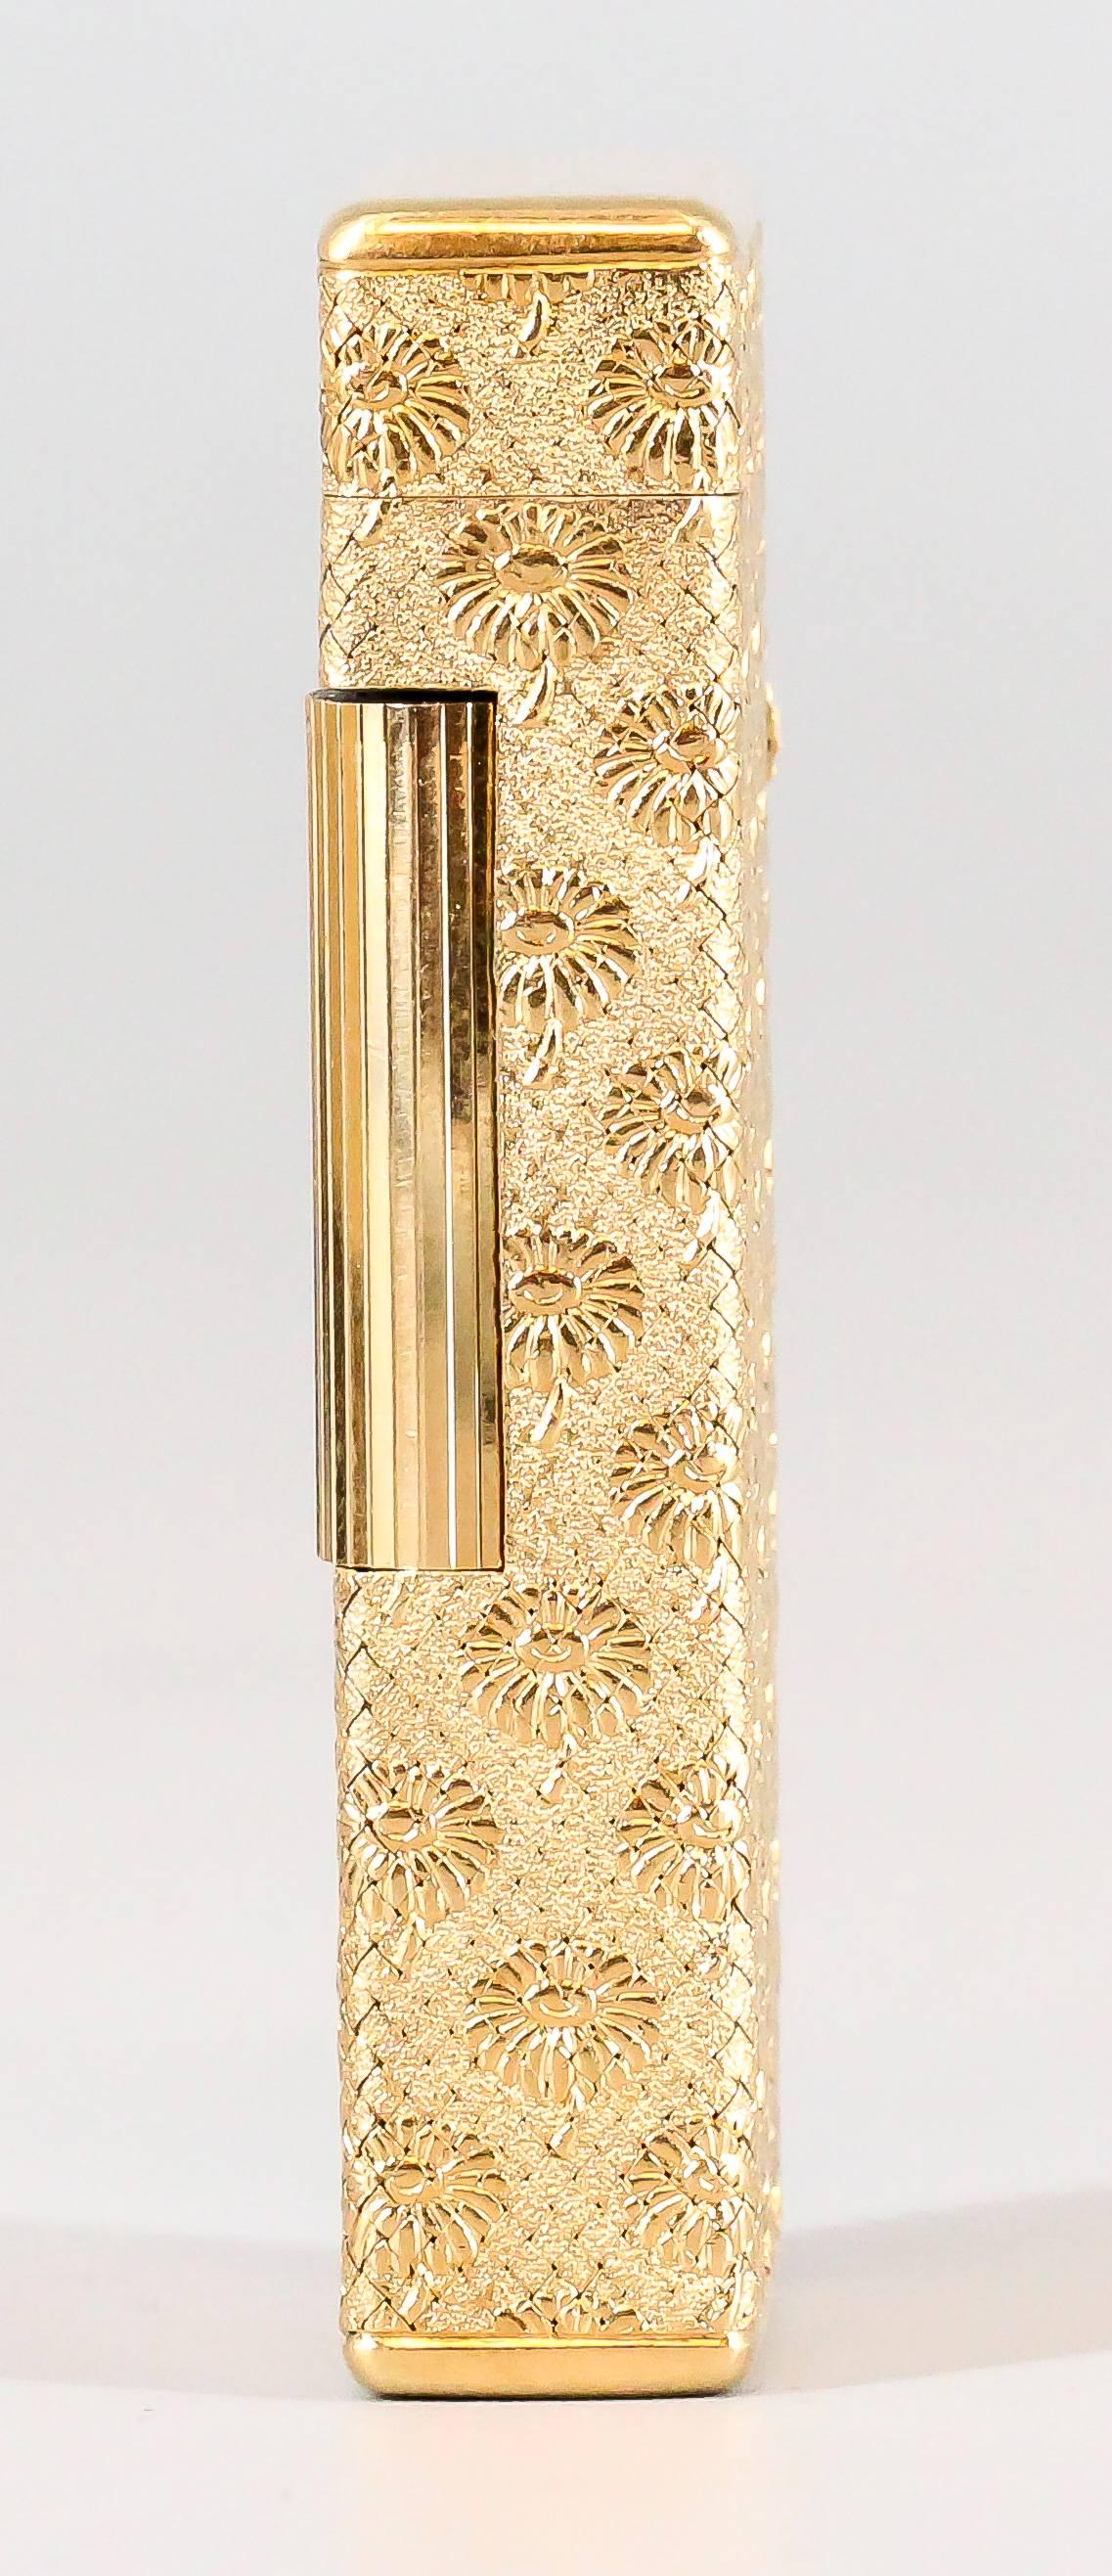 Rare 18K yellow gold lighter from the "Marguerite" collection by Boucheron, circa 1960s. It features a repeating flower design on all sides, resembling the Marguerite flower. Beautiful workmanship throughout.

Hallmarks: Boucheron,